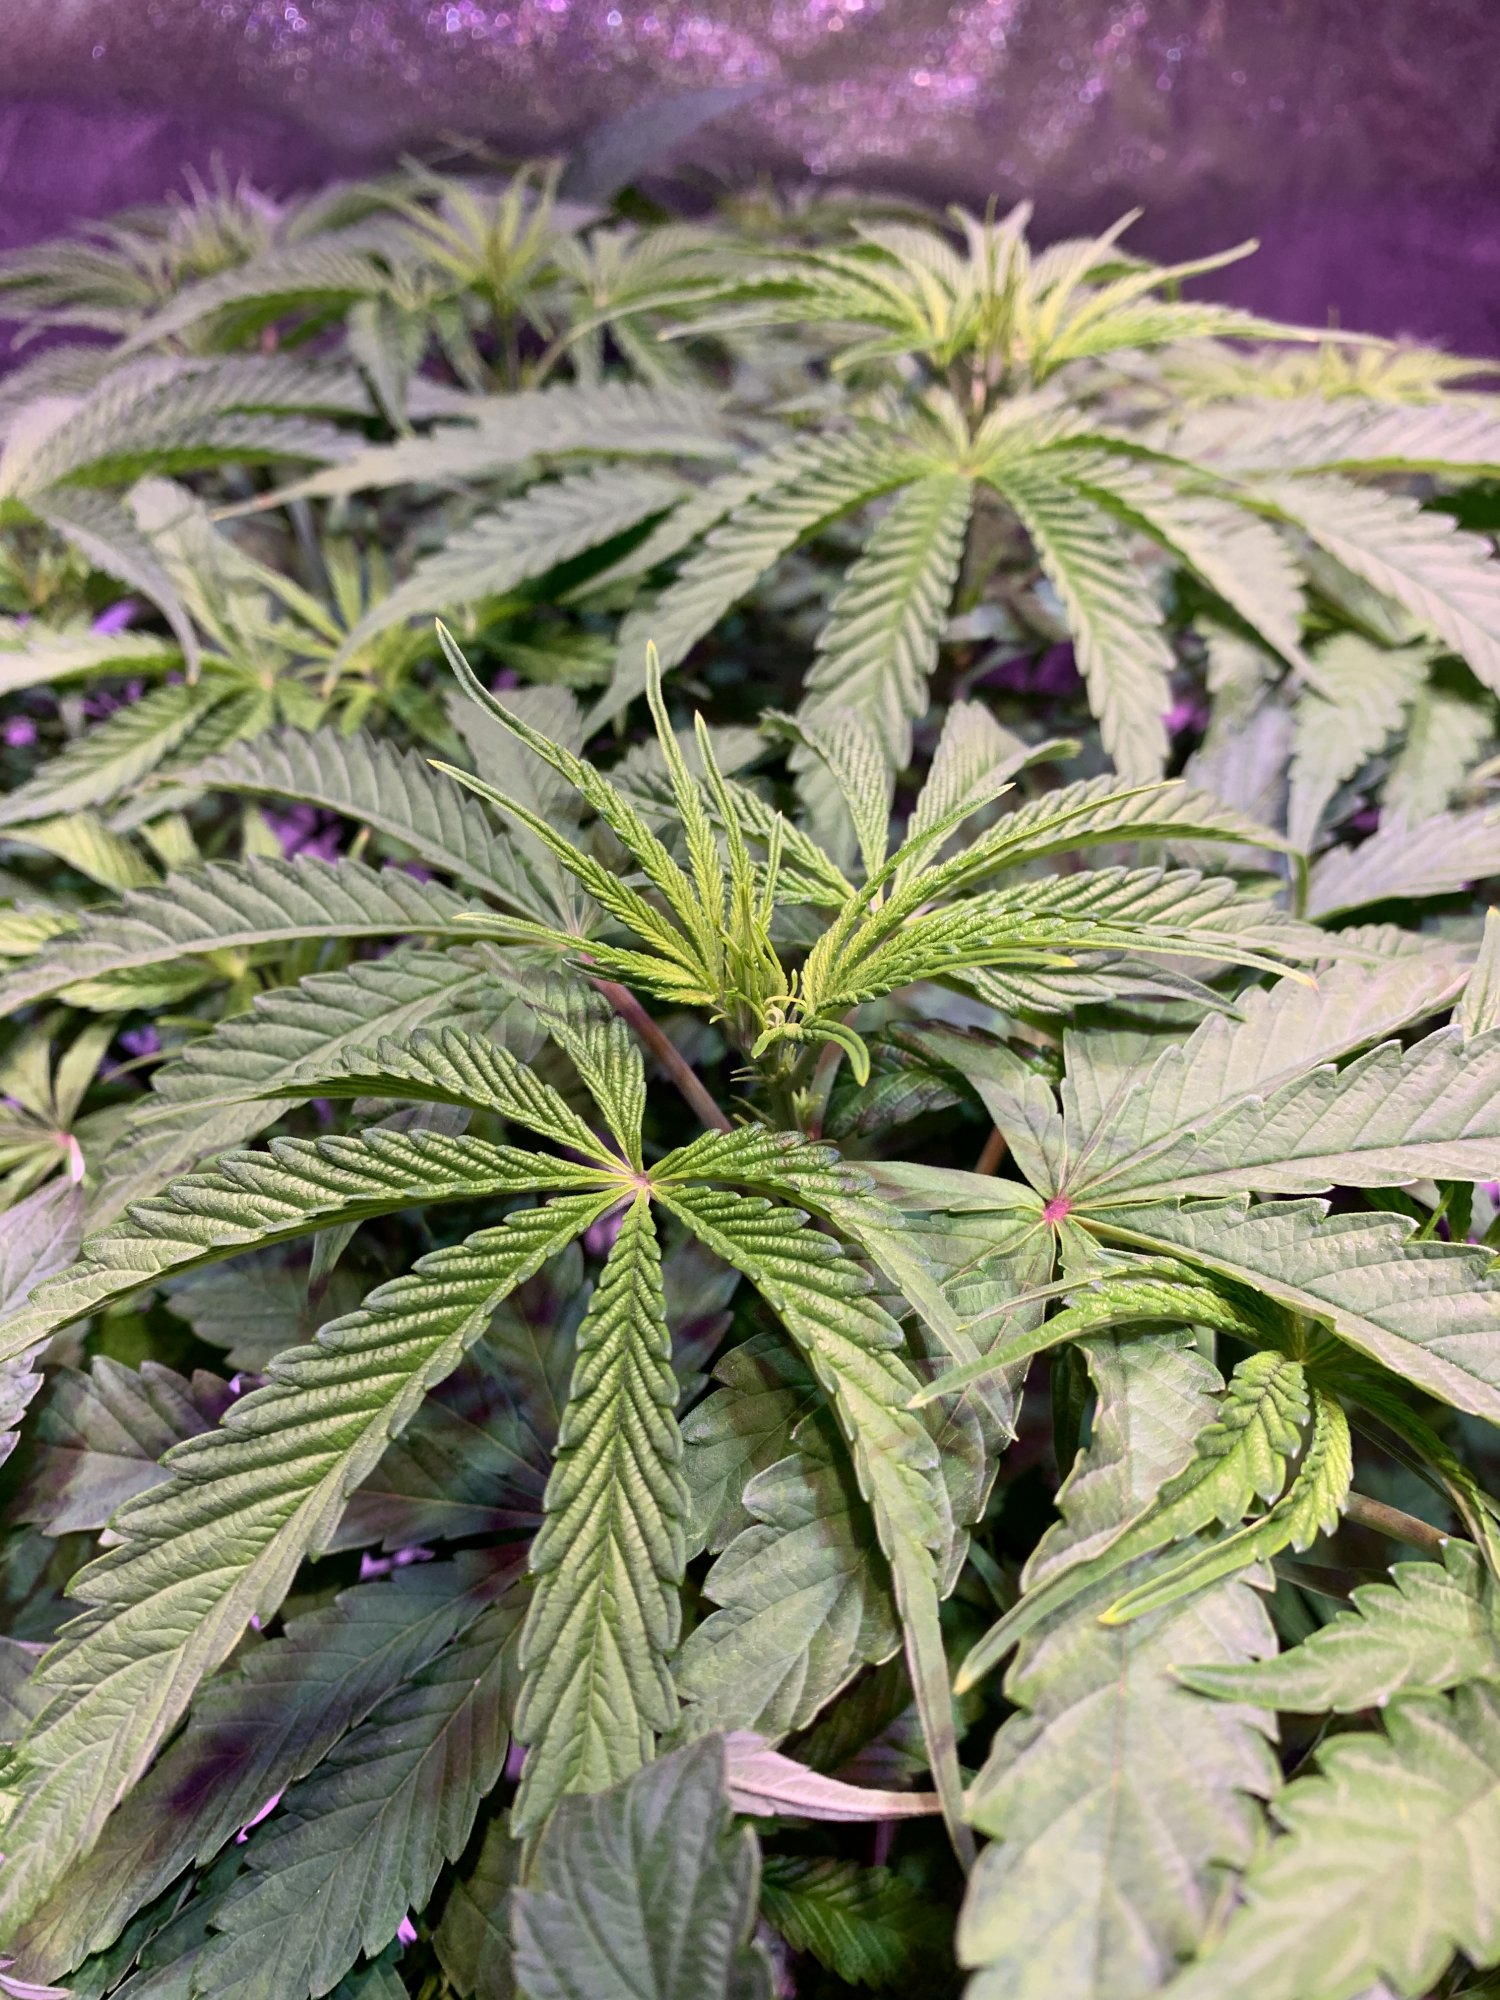 When to drop humidity for flower first grow 4